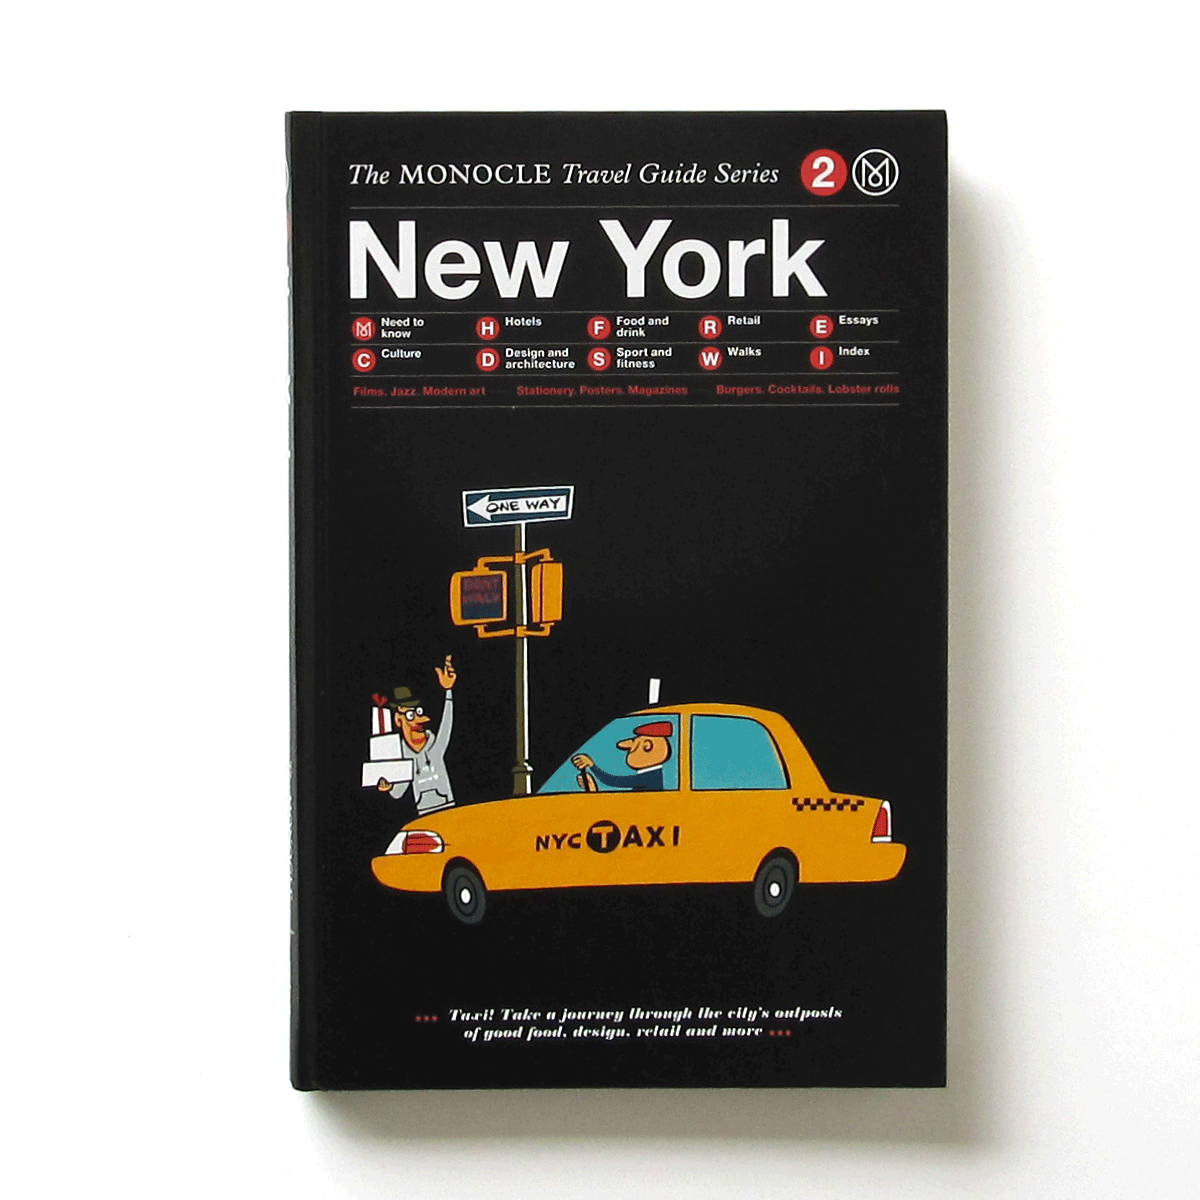 SP TV: The Monocle Travel Guide to New York